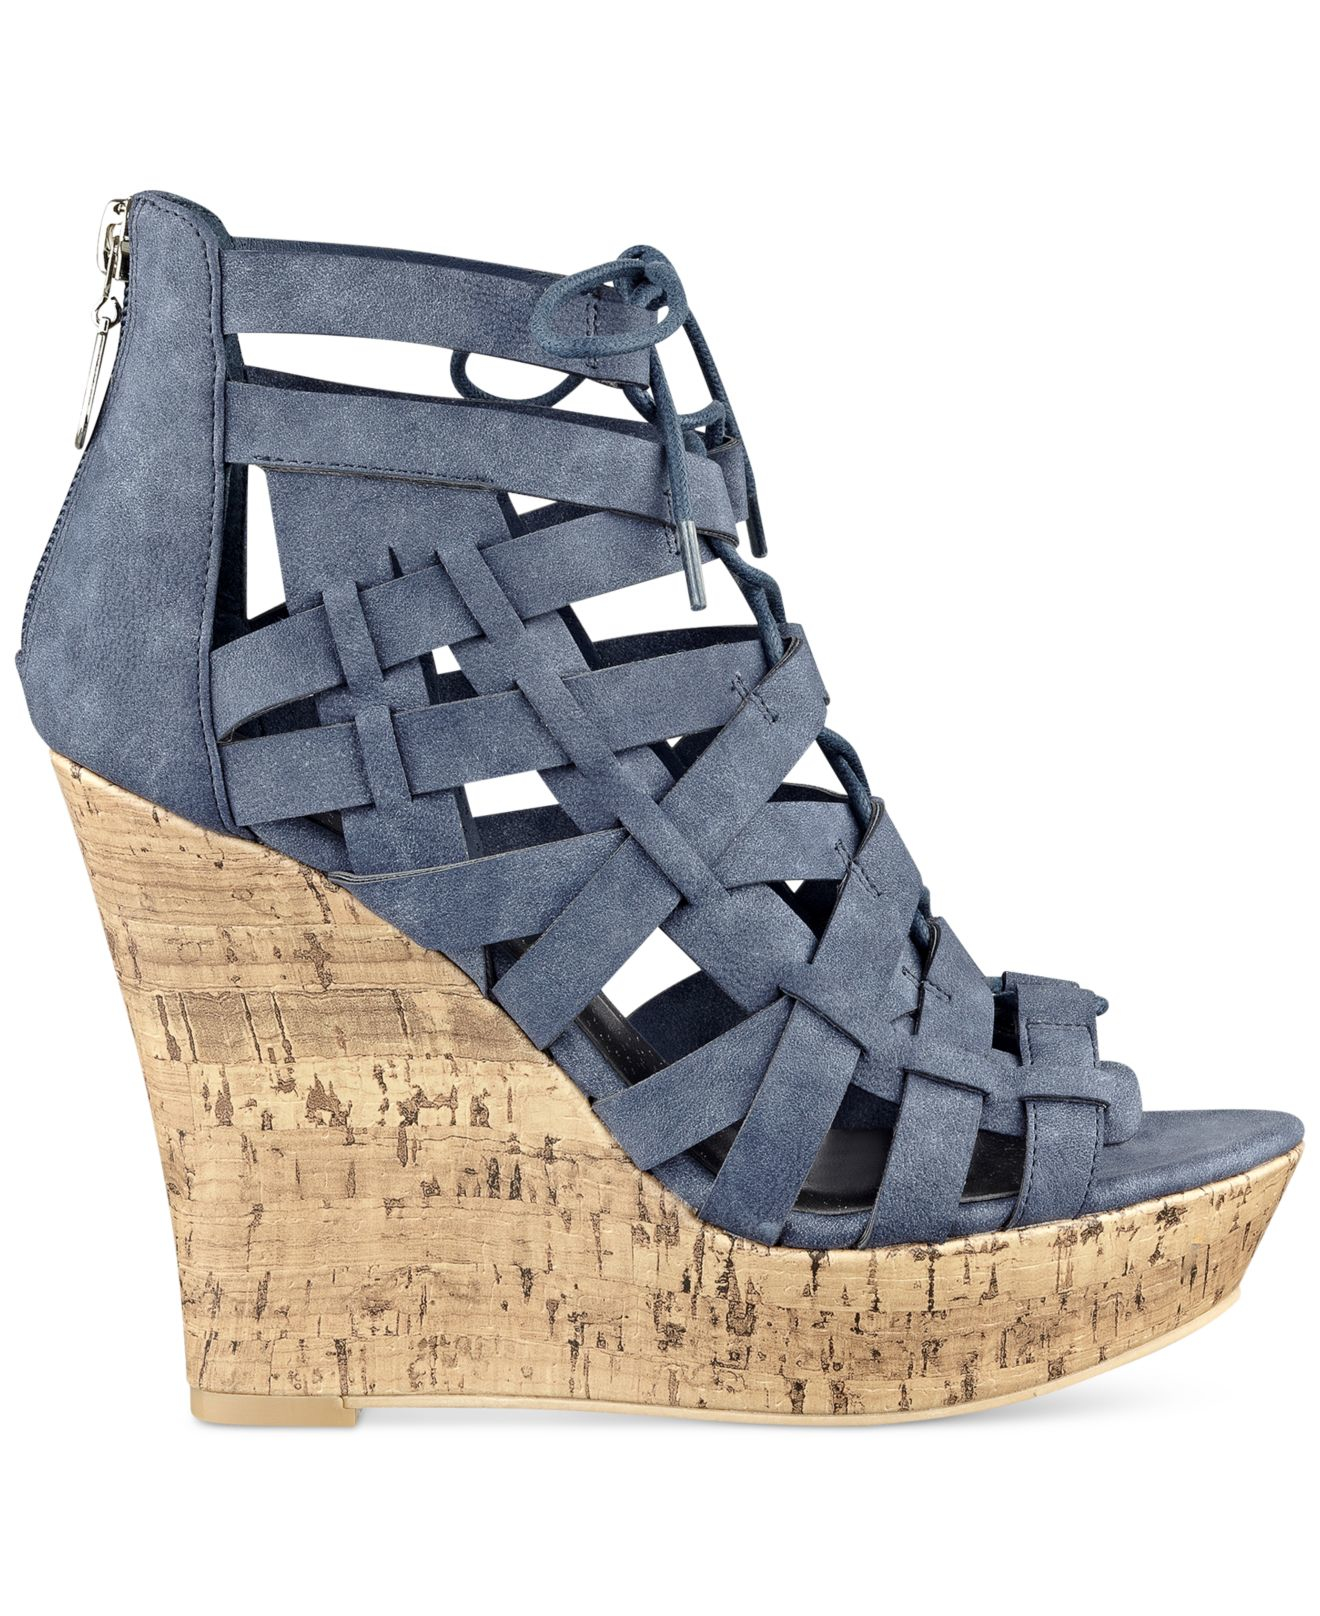 Lyst - G By Guess Derby Lace-up Platform Wedge Sandals in Blue